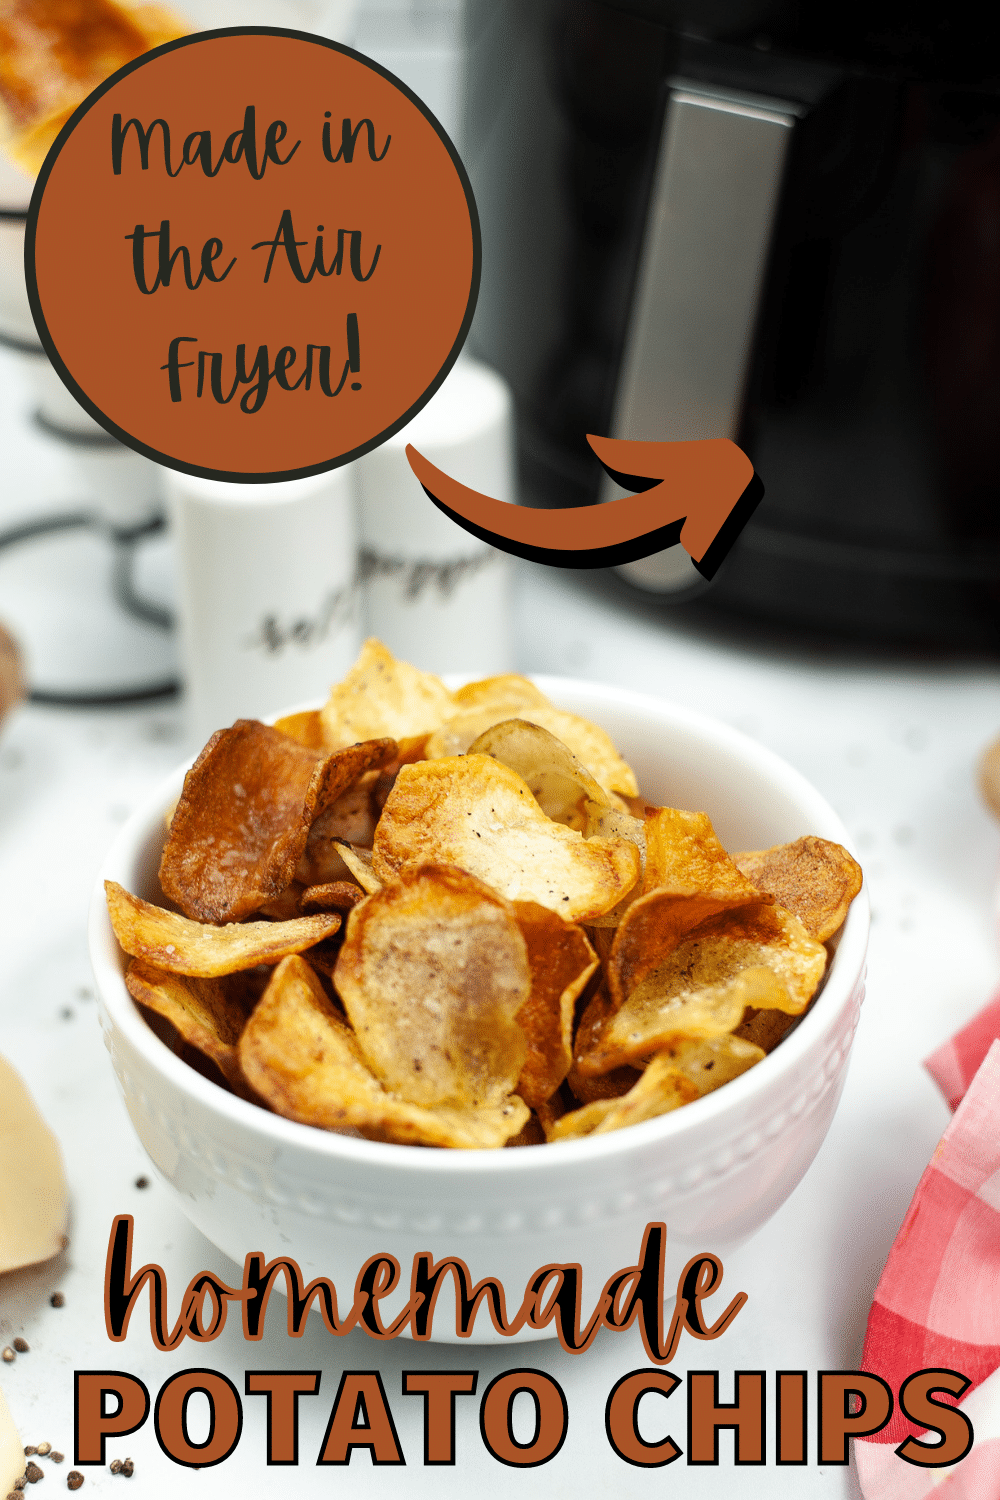 These homemade air fryer potato chips are crunchy & will satisfy your snack cravings. They're cheaper & healthier than store-bought chips. #airfryer #potatochips #homemade #recipe via @wondermomwannab